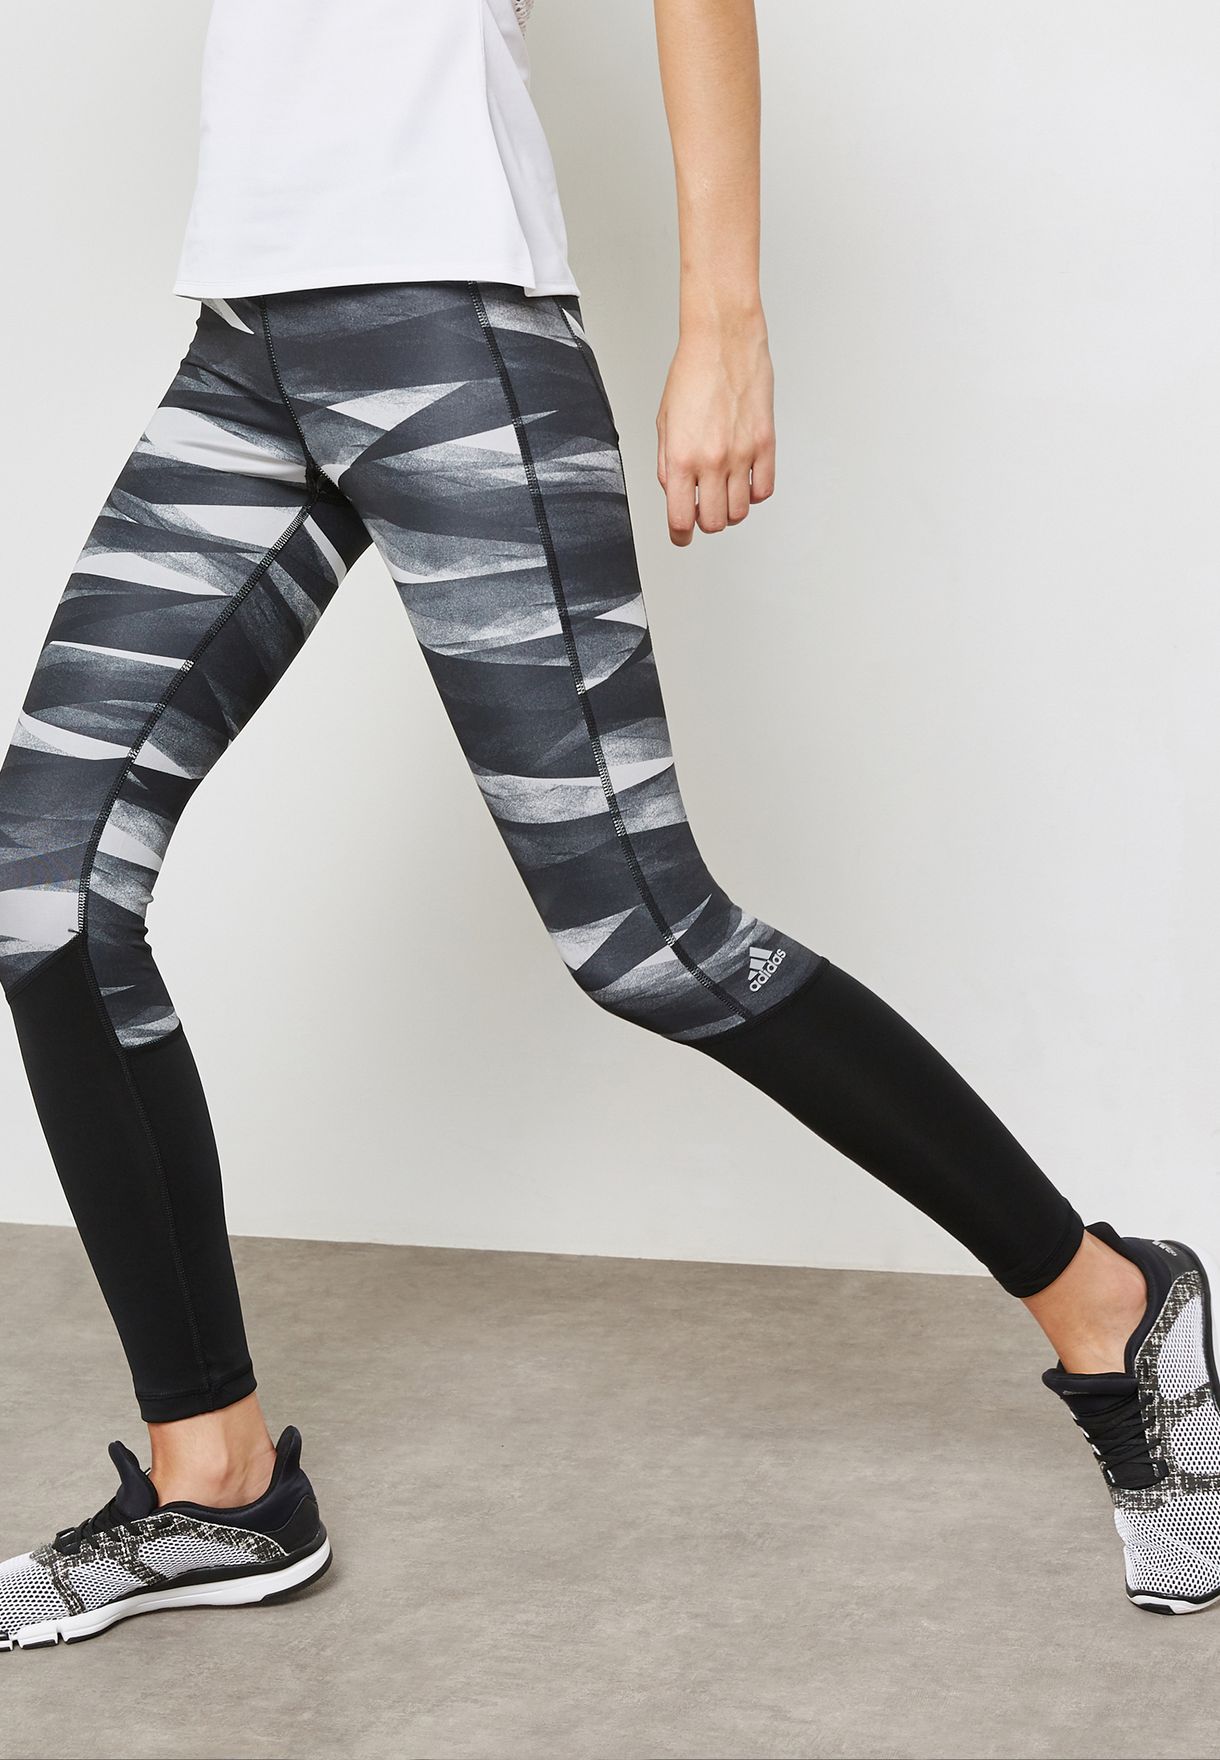 Buy > adidas printed tights > in stock